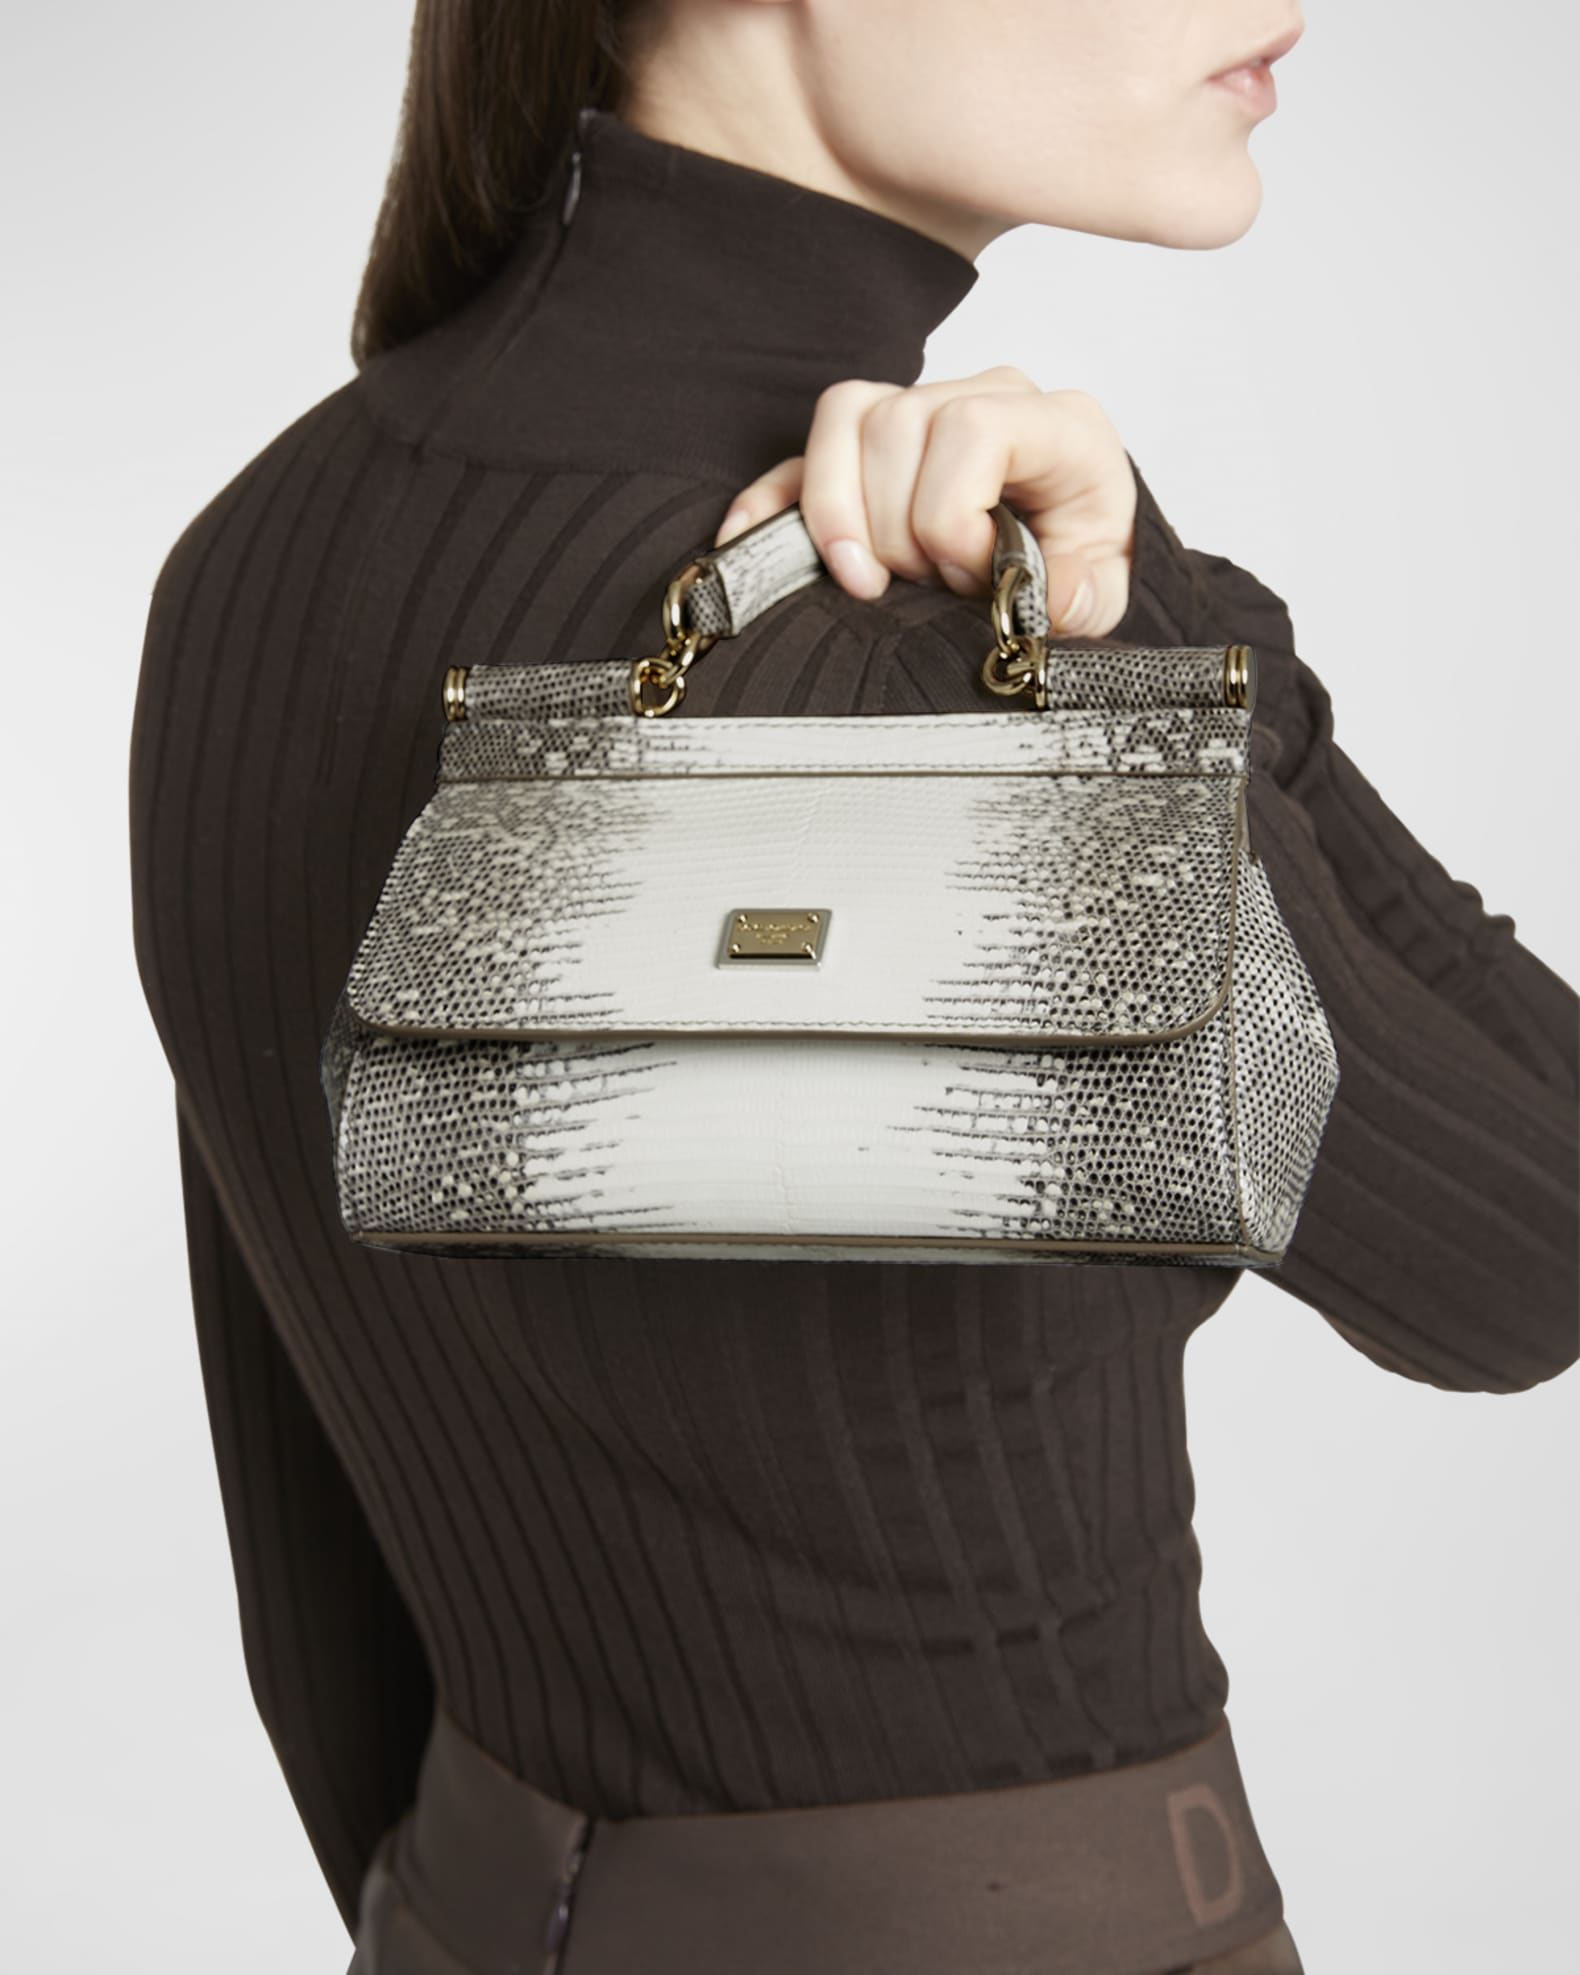 Dolce & Gabbana Silver Lizard Embossed Leather Small Miss Sicily